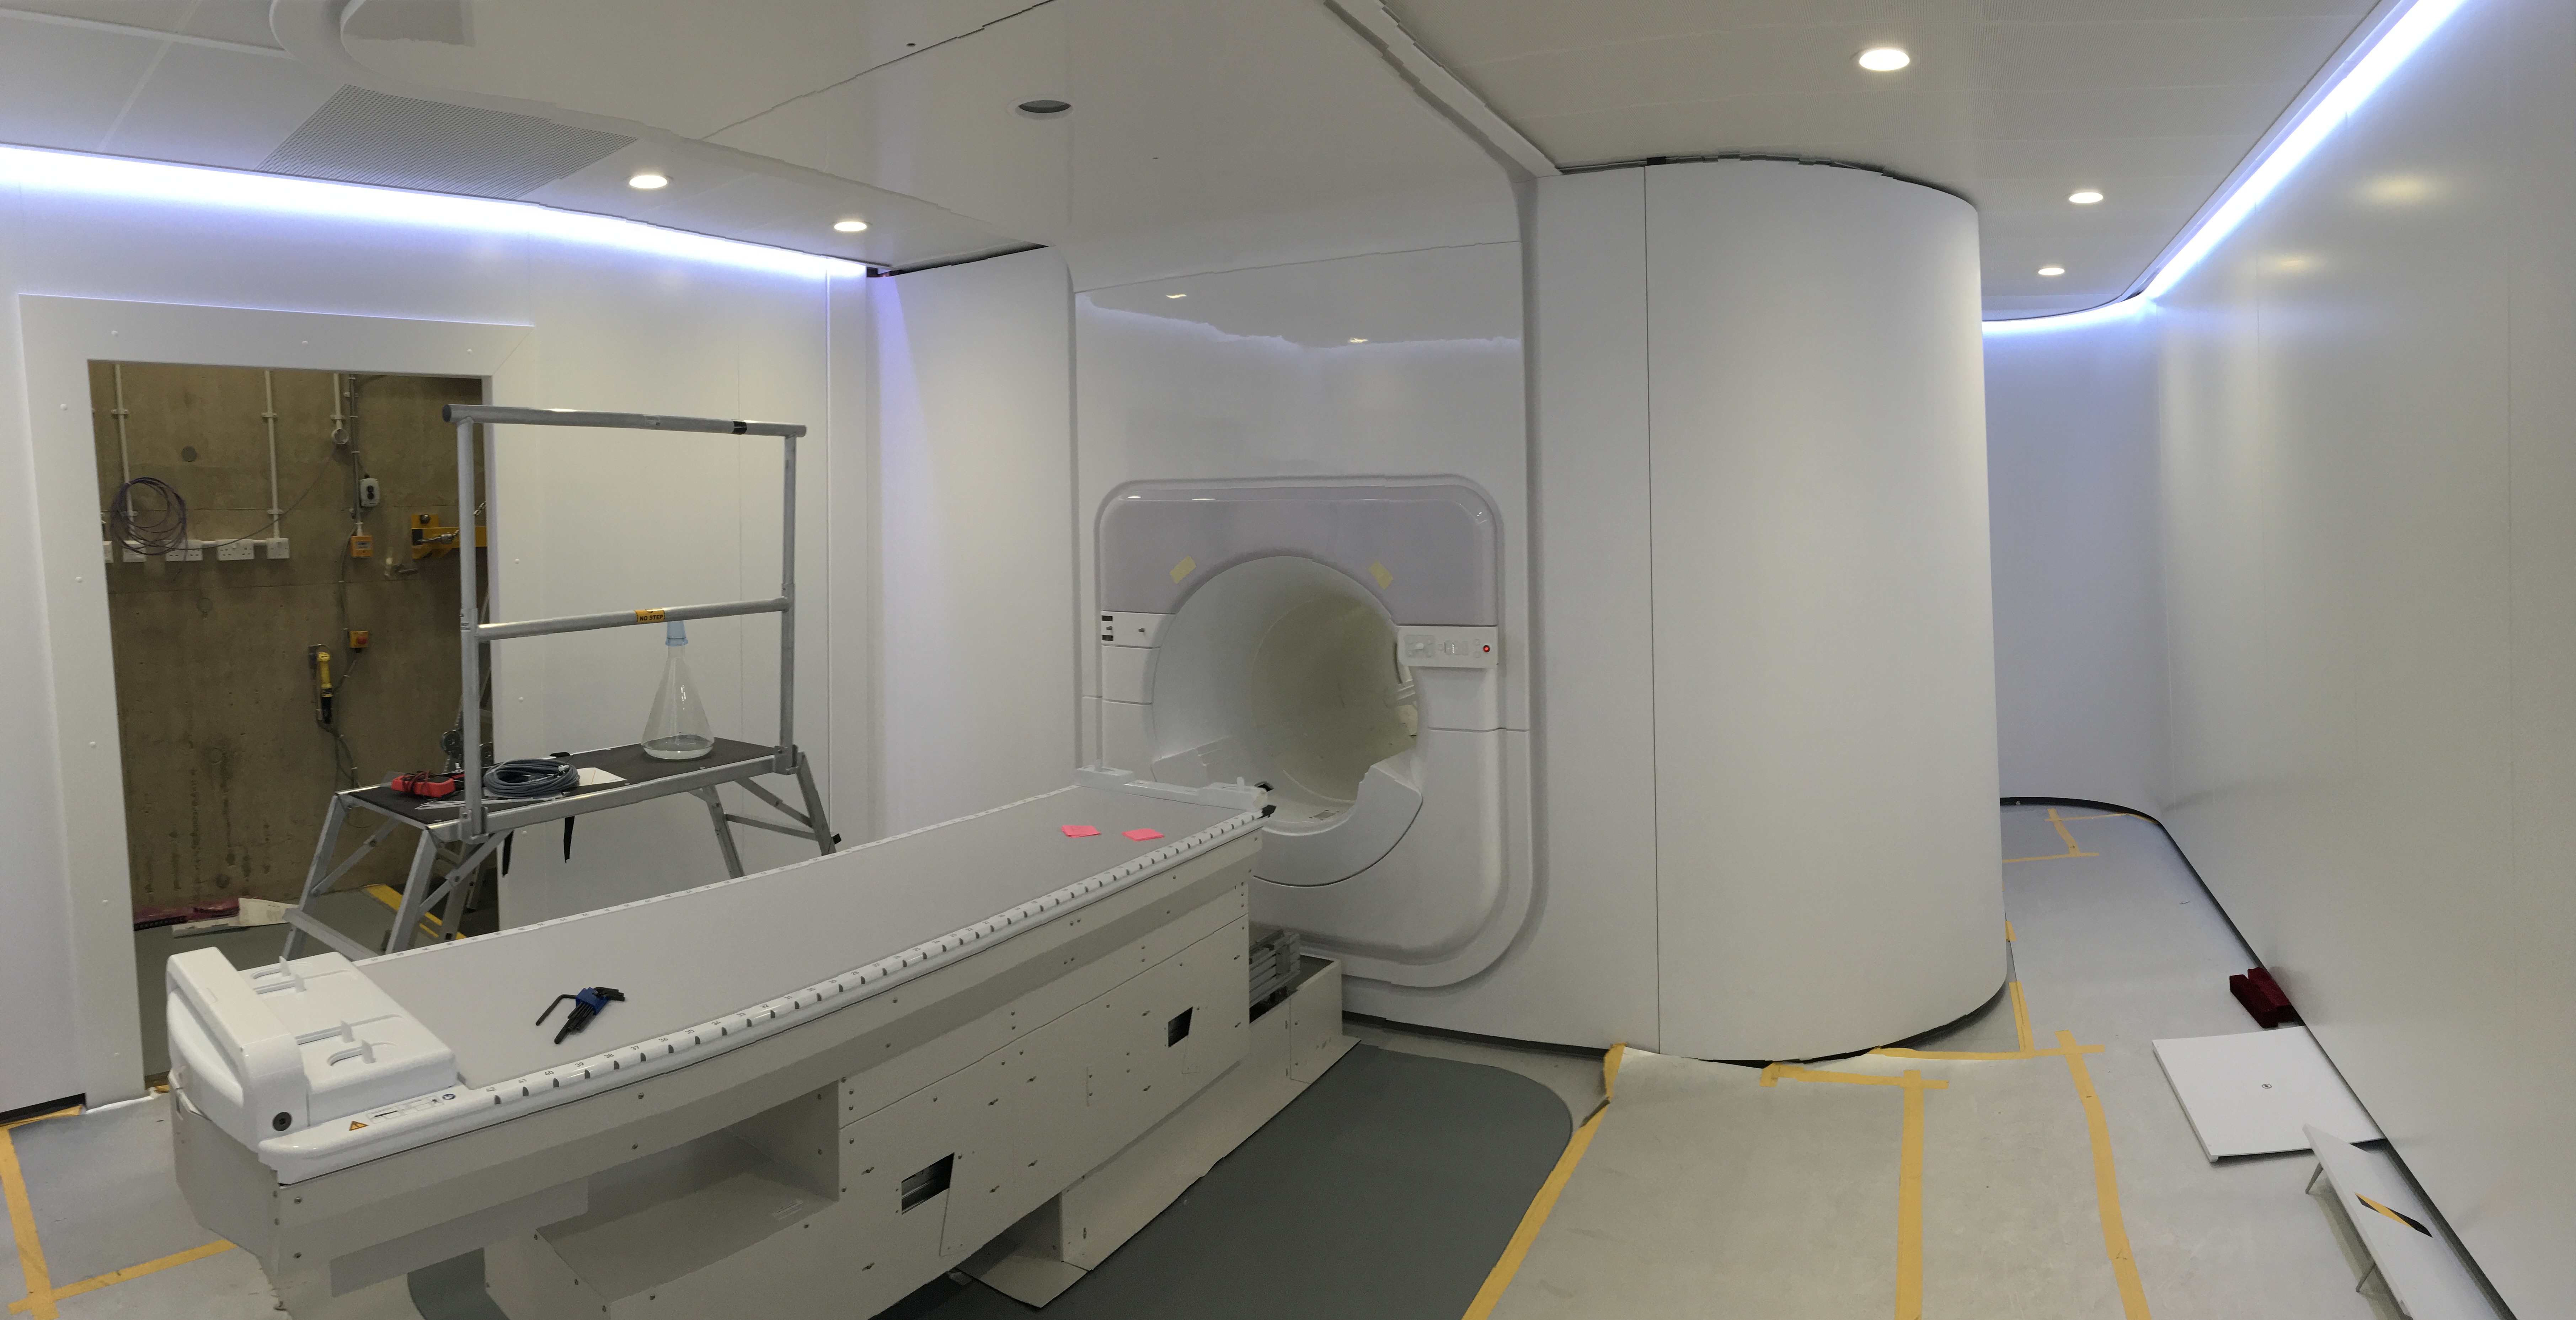 The MR-linac is designed to improve targeting of tumour tissue while reducing exposure of normal tissue to radiation beams.